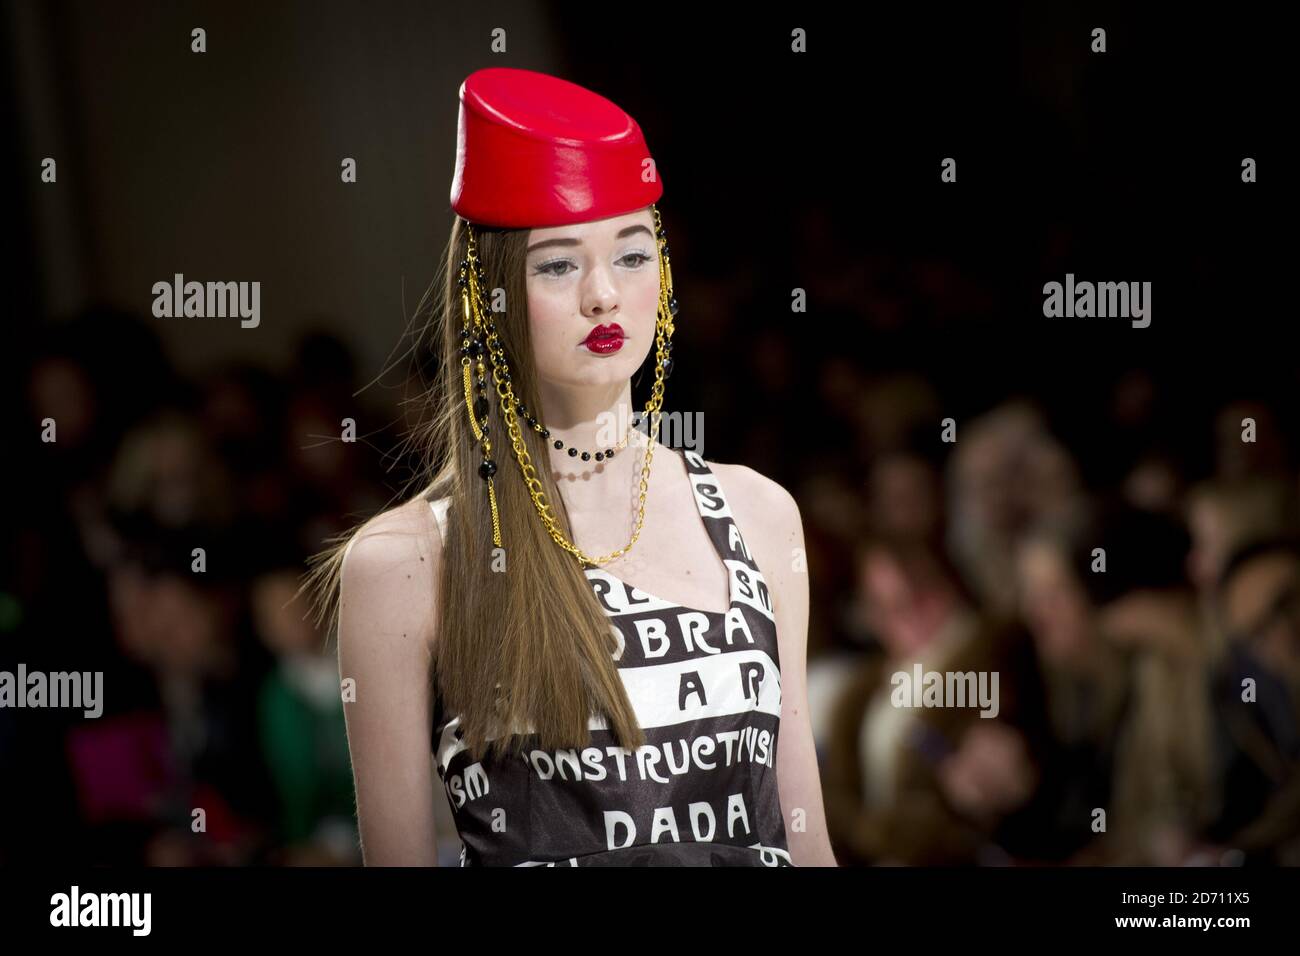 Models on the catwalk at the Belle Sauvage fashion show, at the Fashion Scout venue, at Freemasons Hall, as part of London Fashion Week 2014. Stock Photo